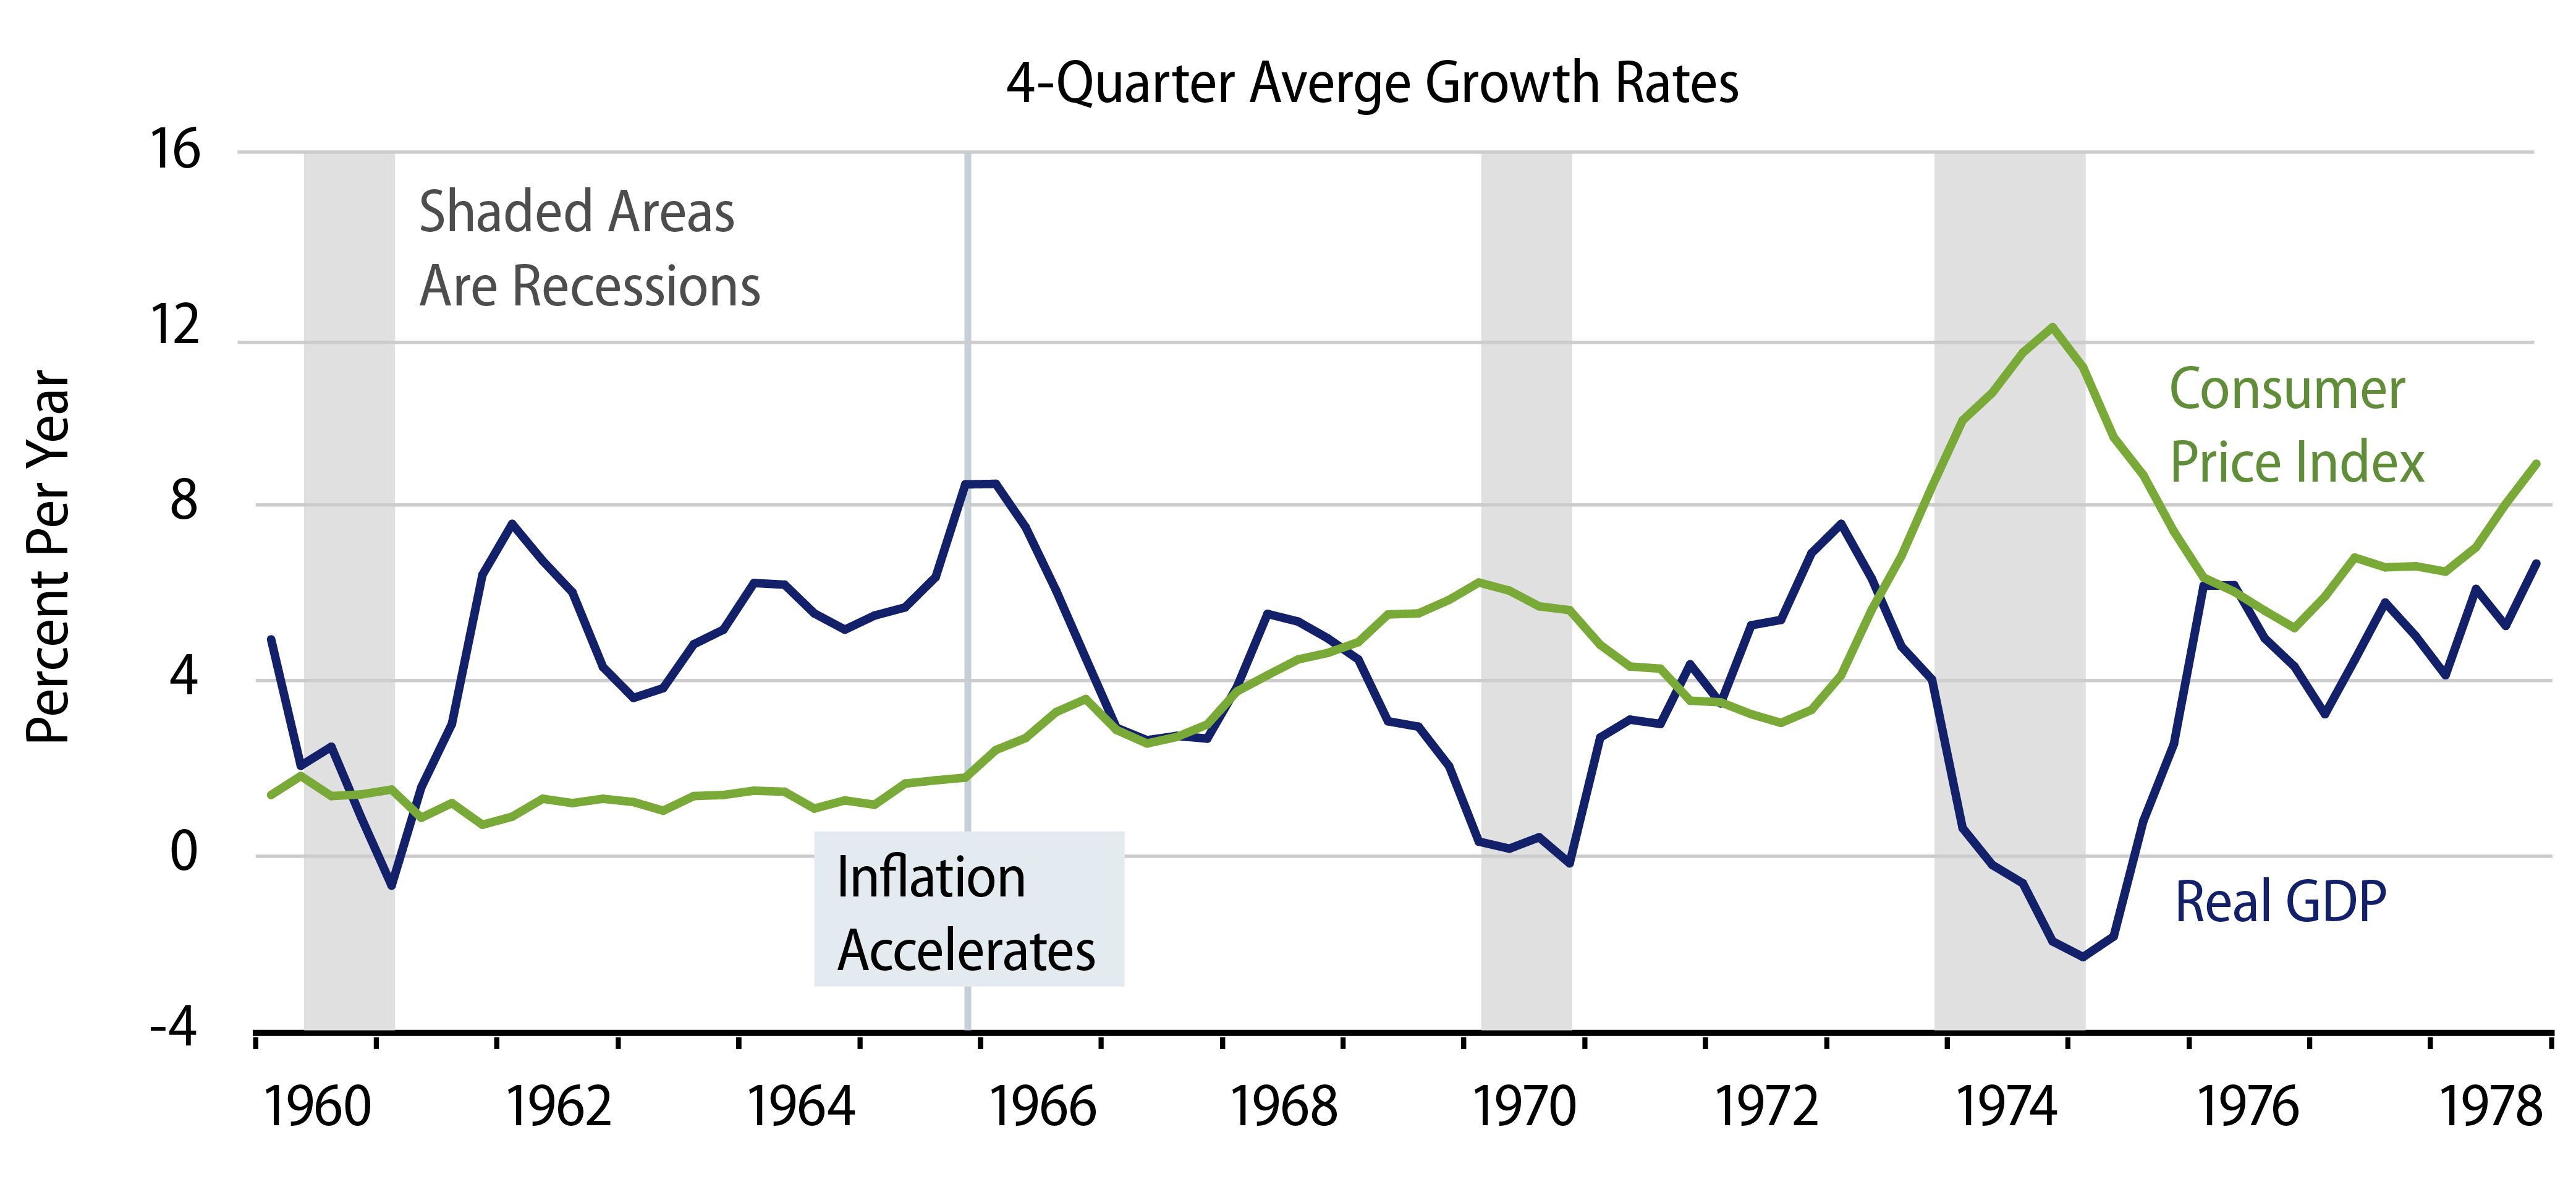 Real GDP Growth and CPI Inflation—1960s and 1970s